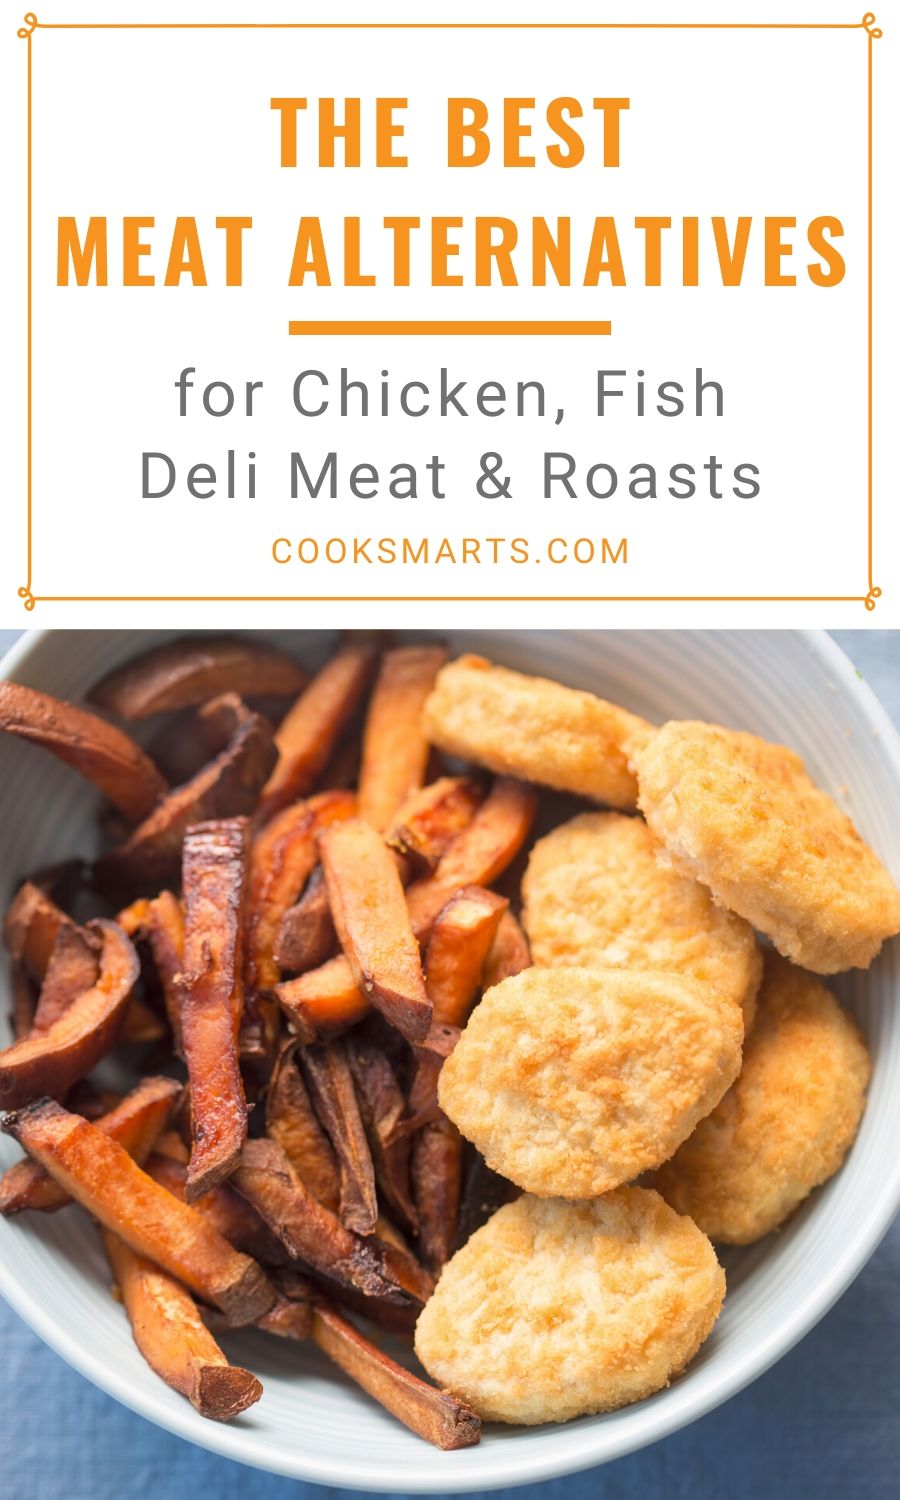 The Best Meat Alternatives for Chicken, Fish, Deli Meat, and Roasts | Cook Smarts